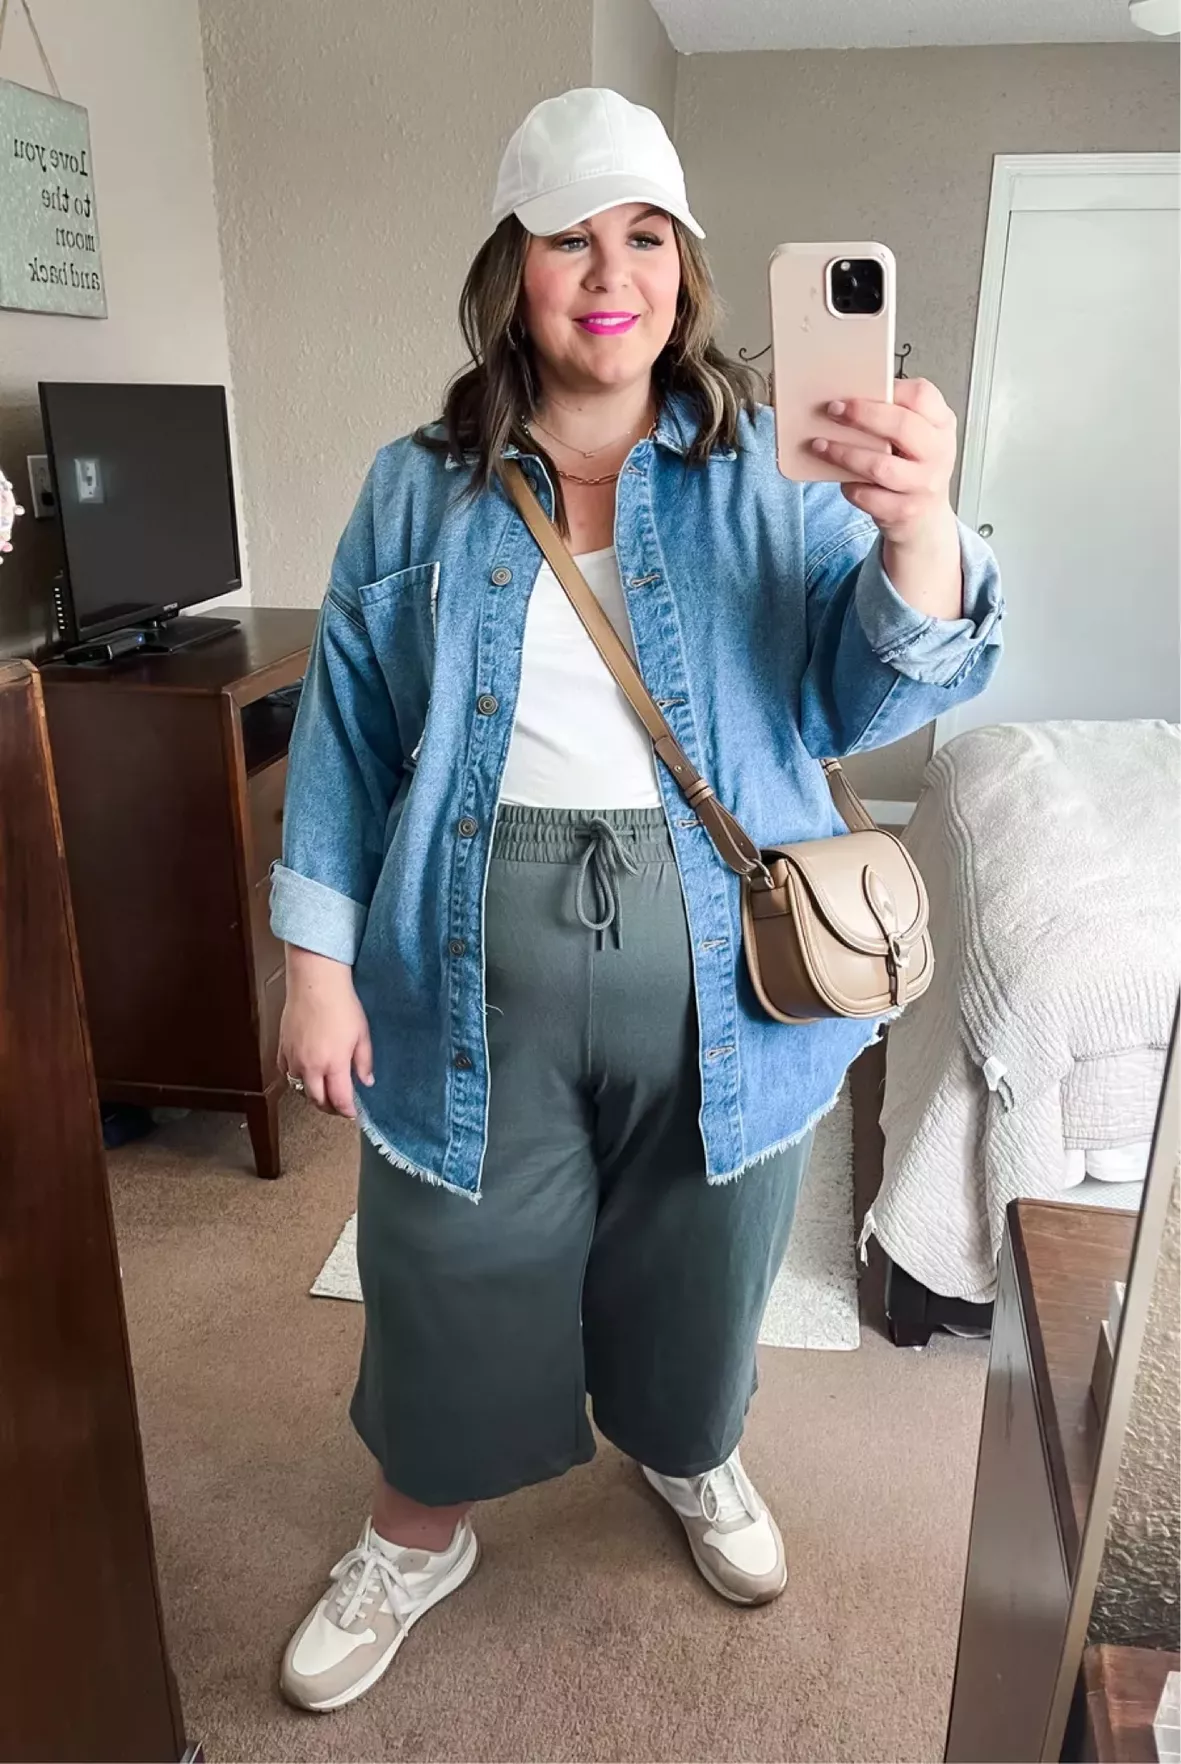 How to Wear Casual Plus Size Outfits With Sneakers : What You Need